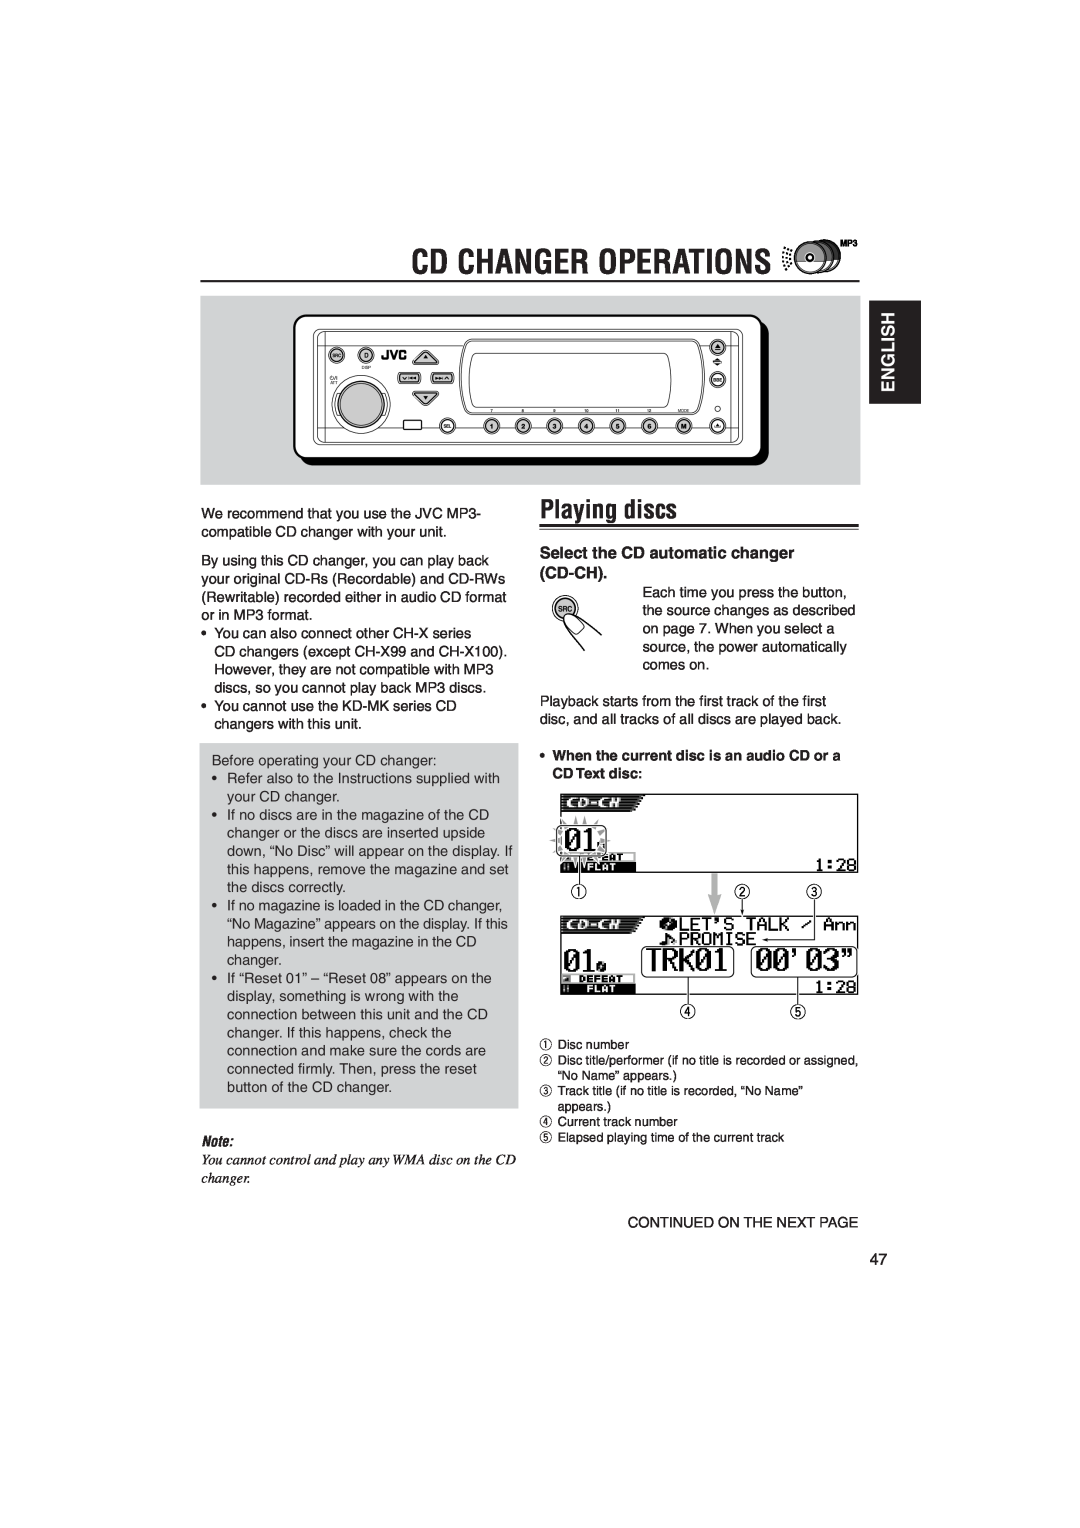 JVC KD-SH9105 manual Cd Changer Operations, Playing discs, English, Select the CD automatic changer, Cd-Ch 